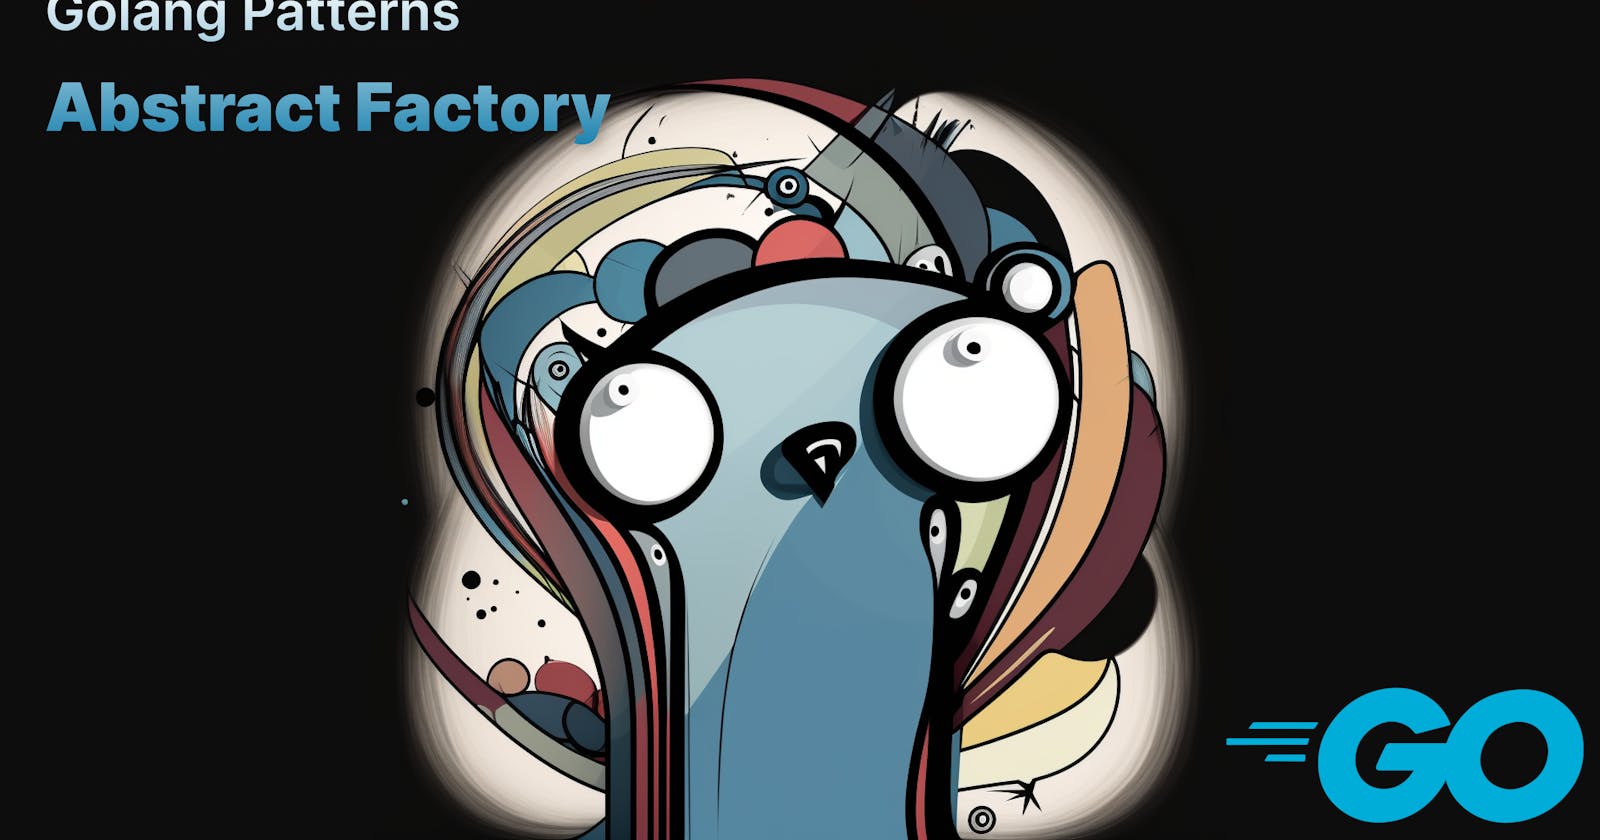 Golang - Abstract Factory Pattern